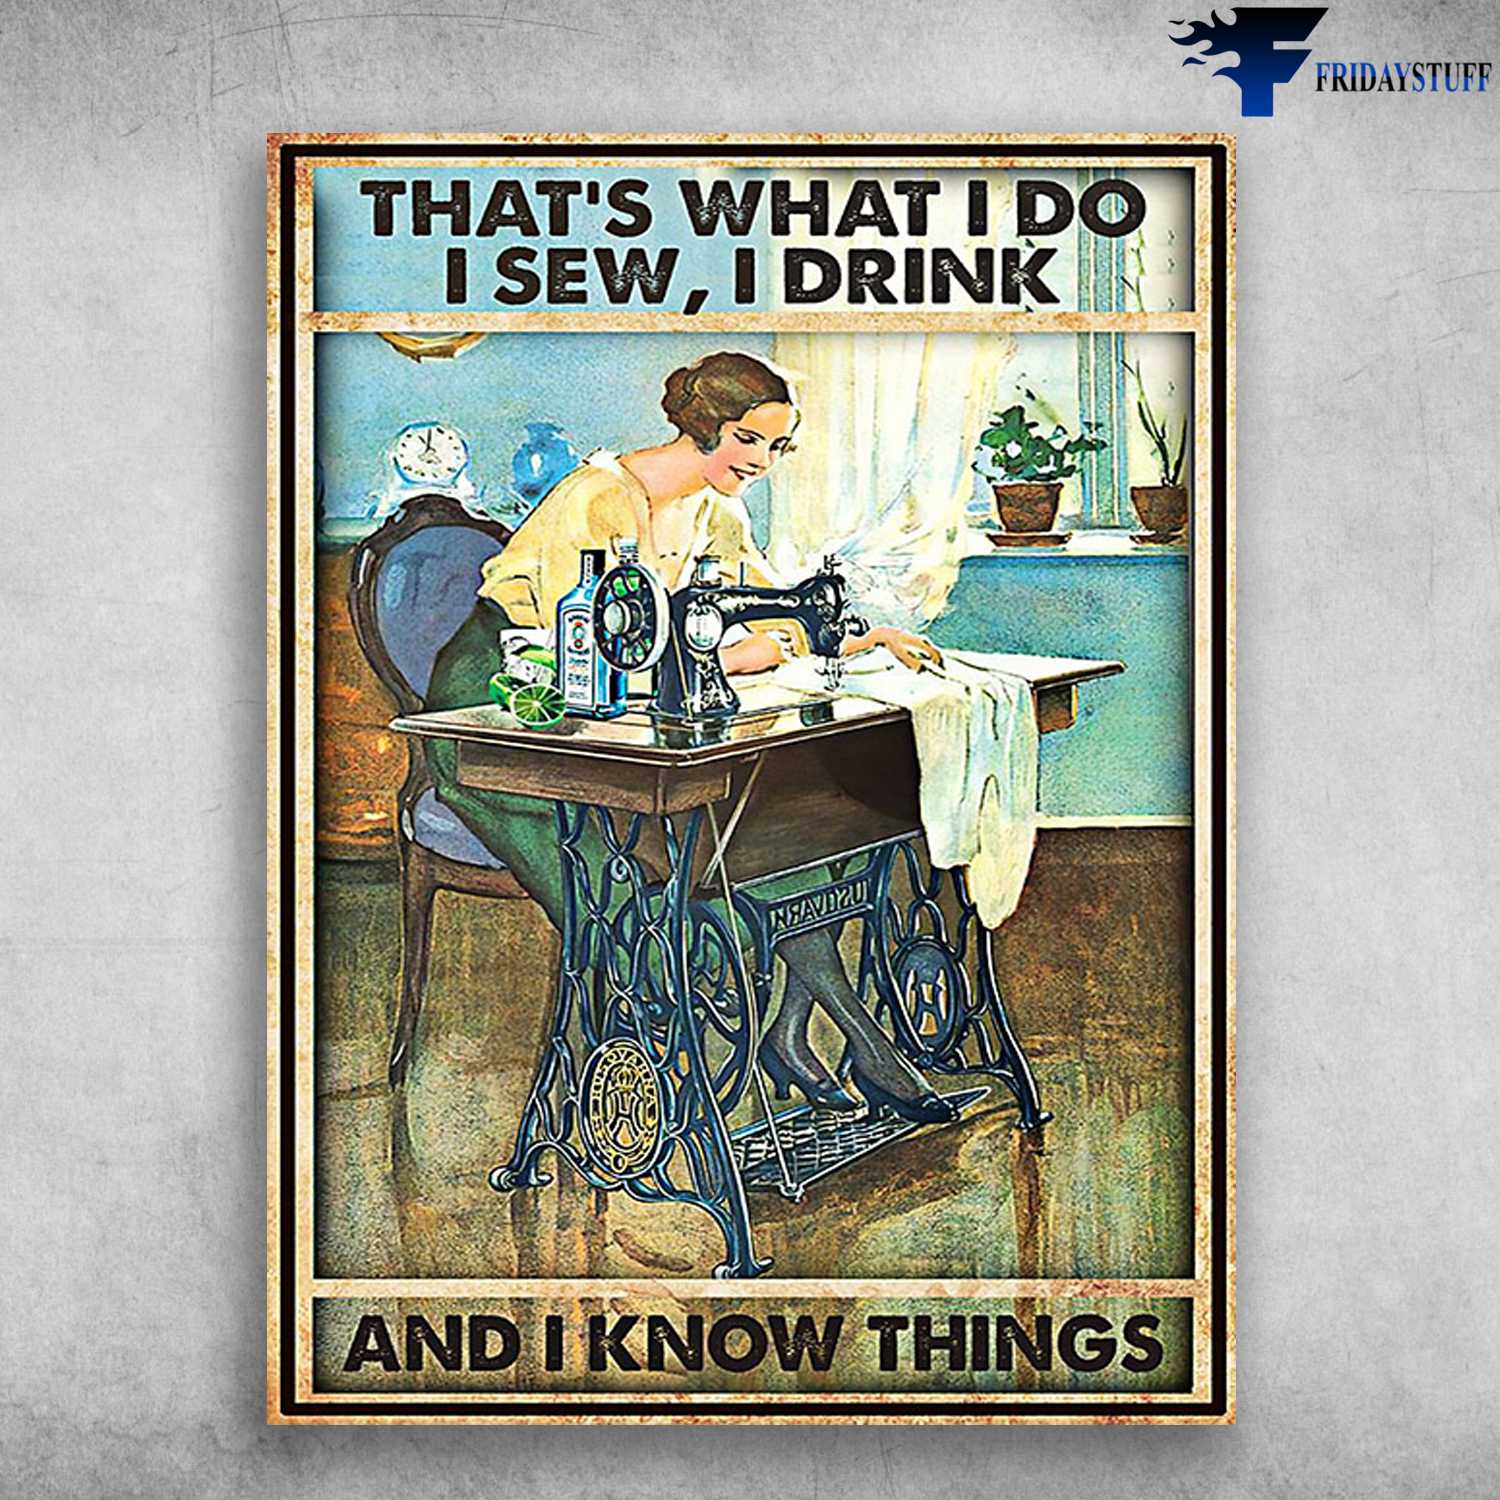 Sewing Girl, Sewing With Wine - That's What I Do, I Sew, I Drink, And I Know Things